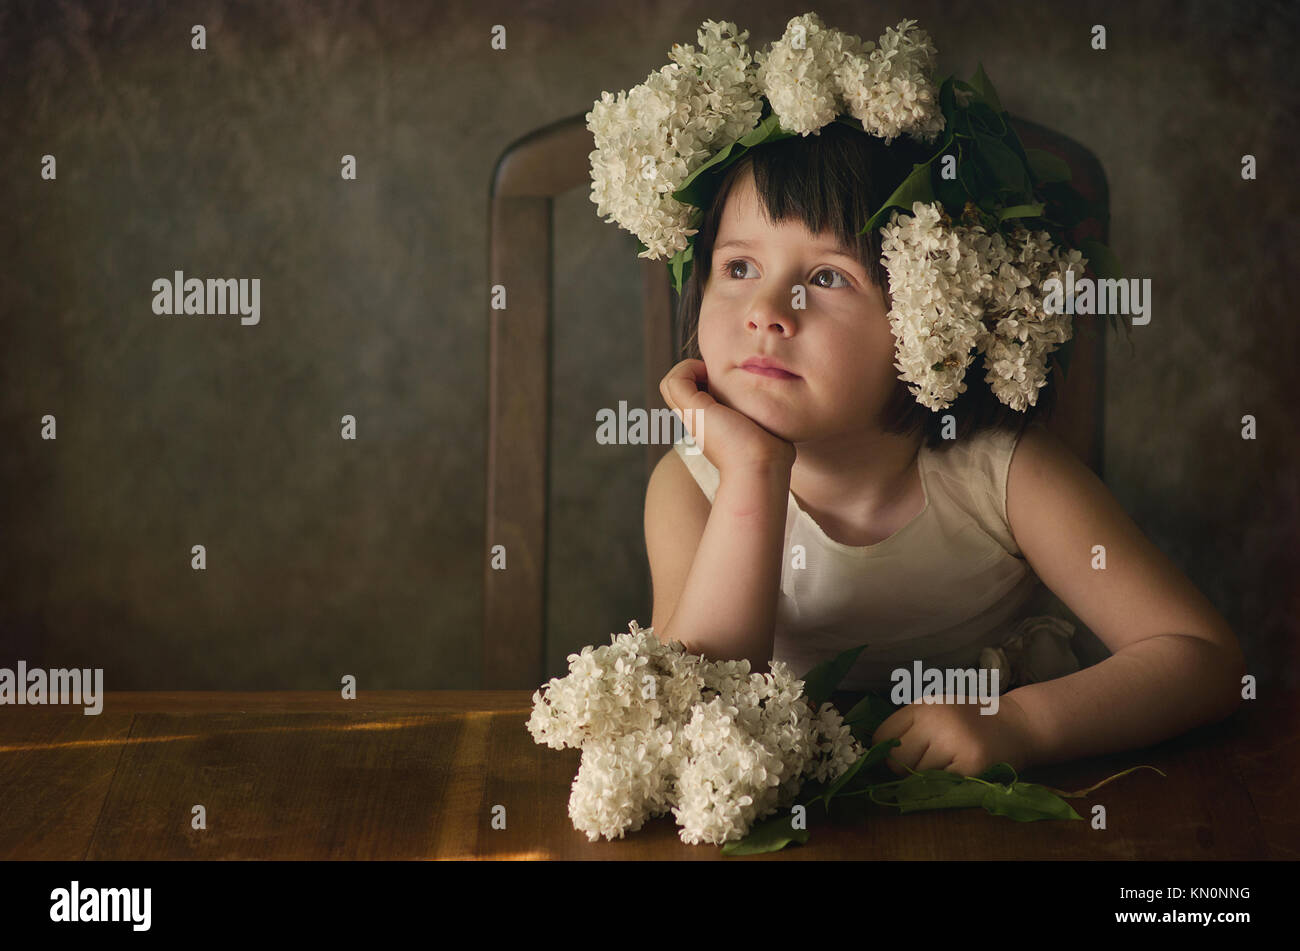 Studio portrait of beautiful girl 2-4 years with lilac flower garland on her head. Dreamy mood, creative look. Stock Photo